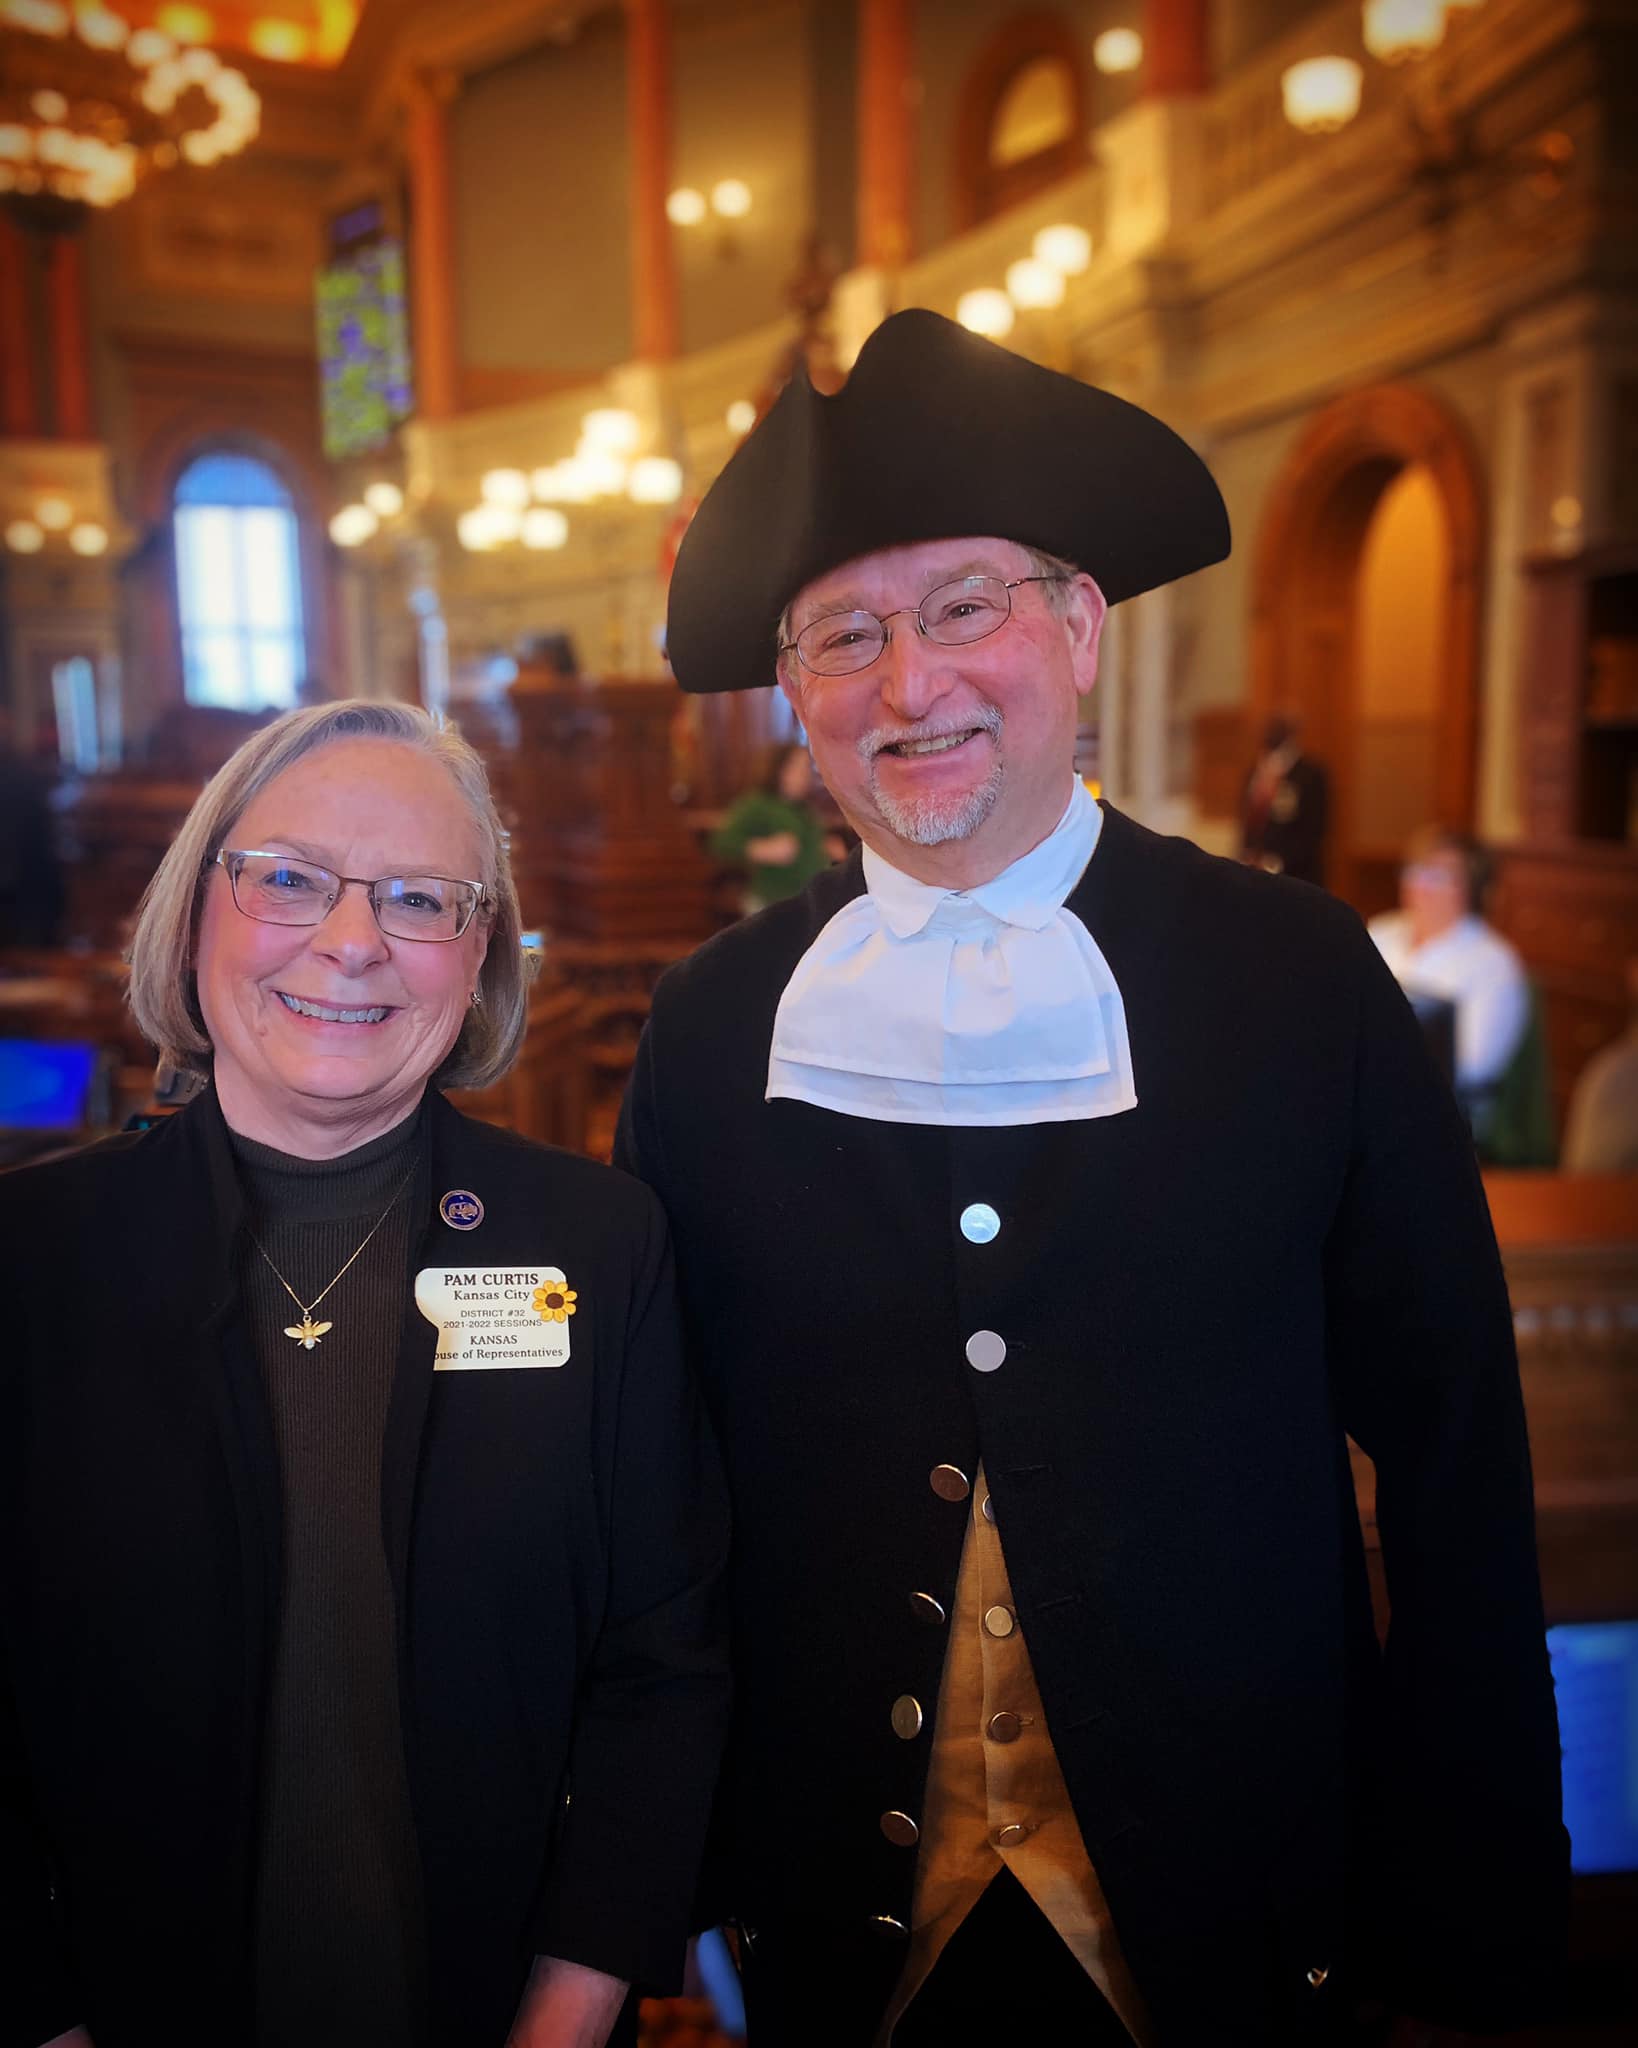 Dr. J Vernon Welkner, Pastor, High Prairie Church of Leavenworth and President of the Kansas Society of the Sons of the American Revolution provided the opening prayer as the guest chaplain in the Kansas House. His dress definitely drew attention!